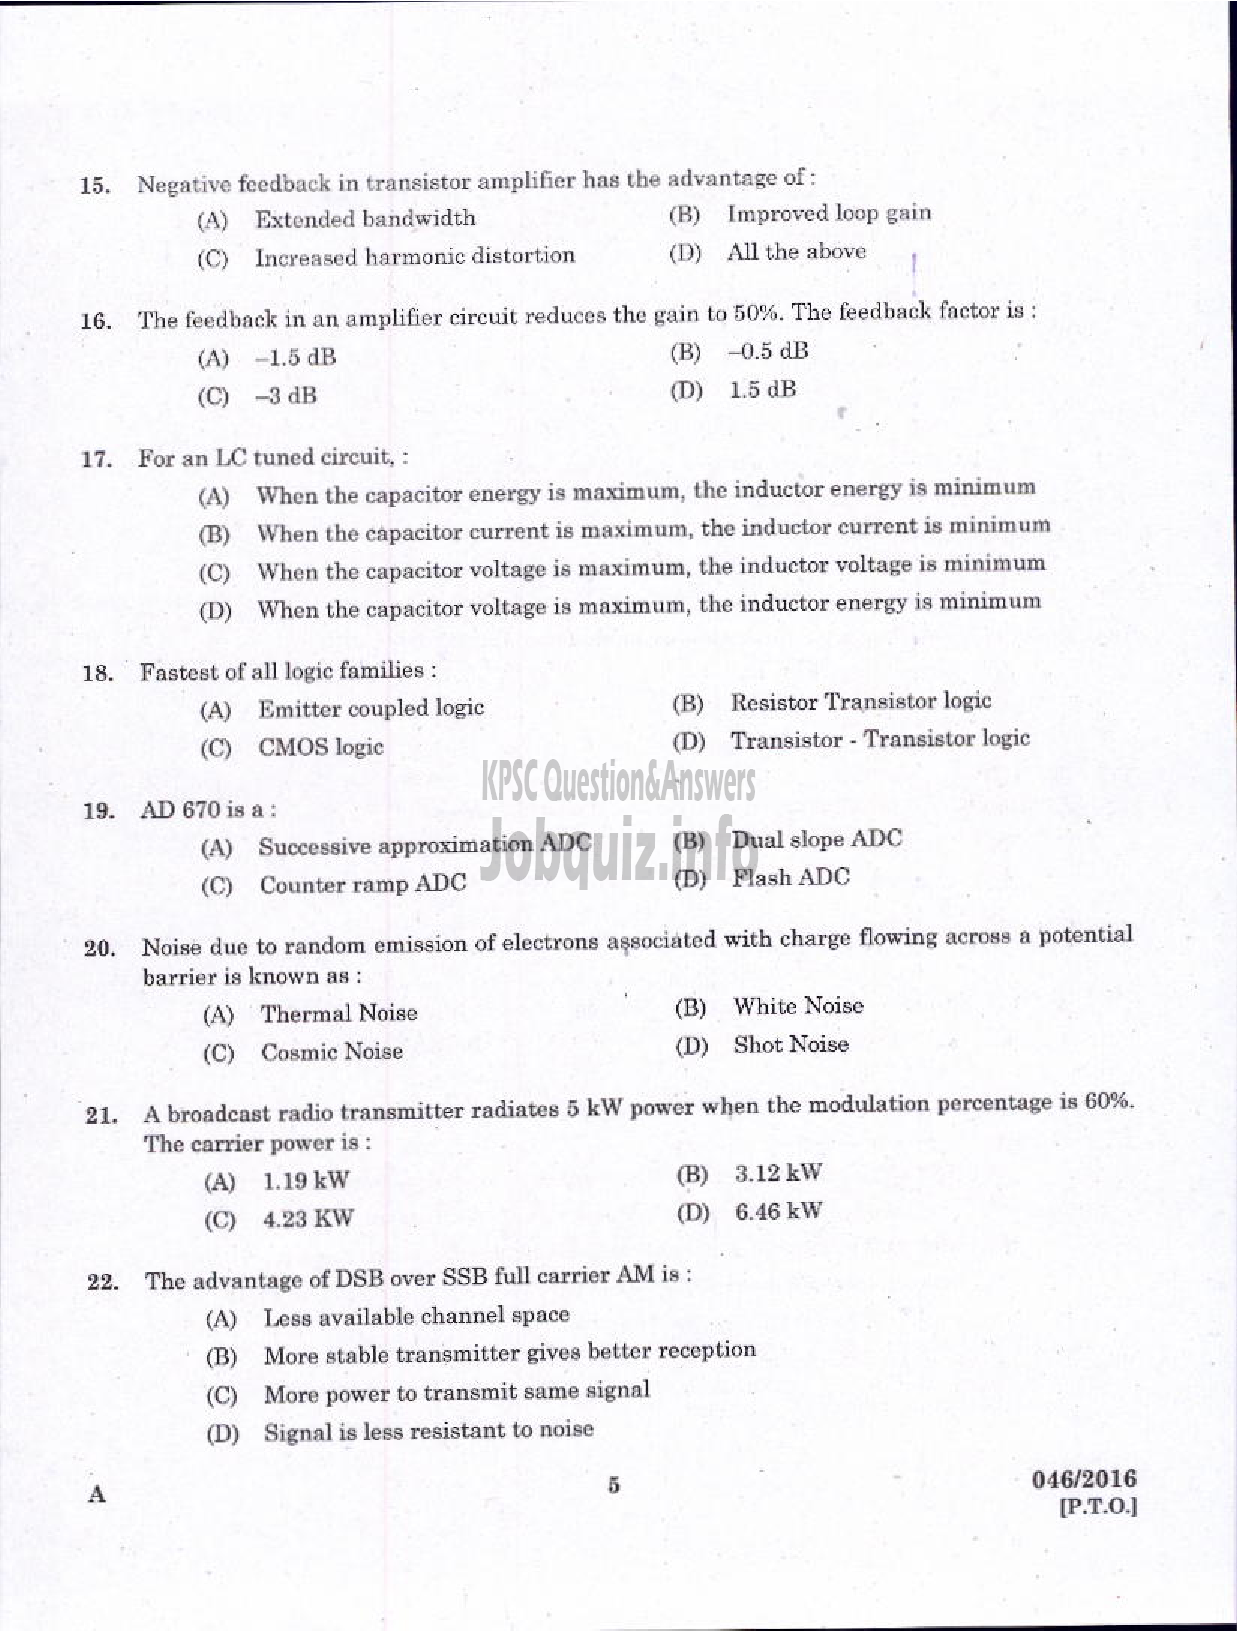 Kerala PSC Question Paper - VOCATIONAL TEACHER MAINTENANCE AND REPAIRS OF RADIO AND TELEVISION-3